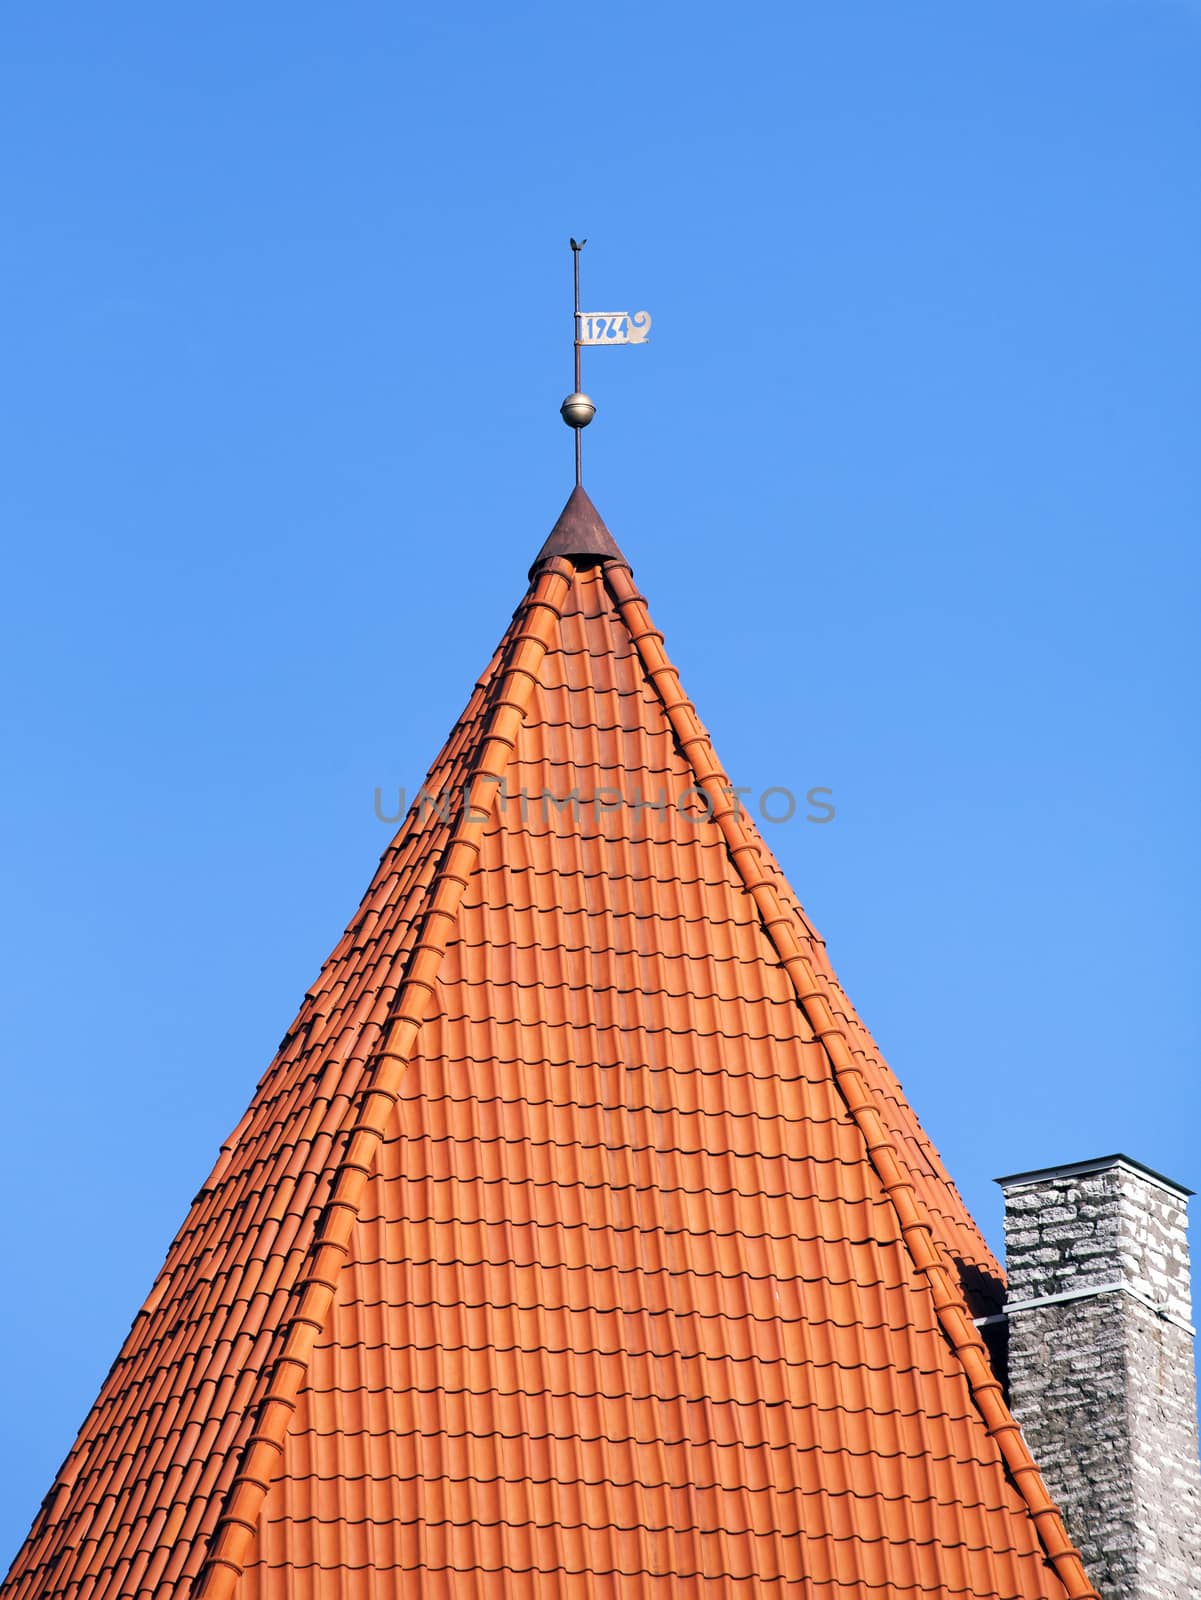 Red roof of a medieval tower, Tallinn, Estonia